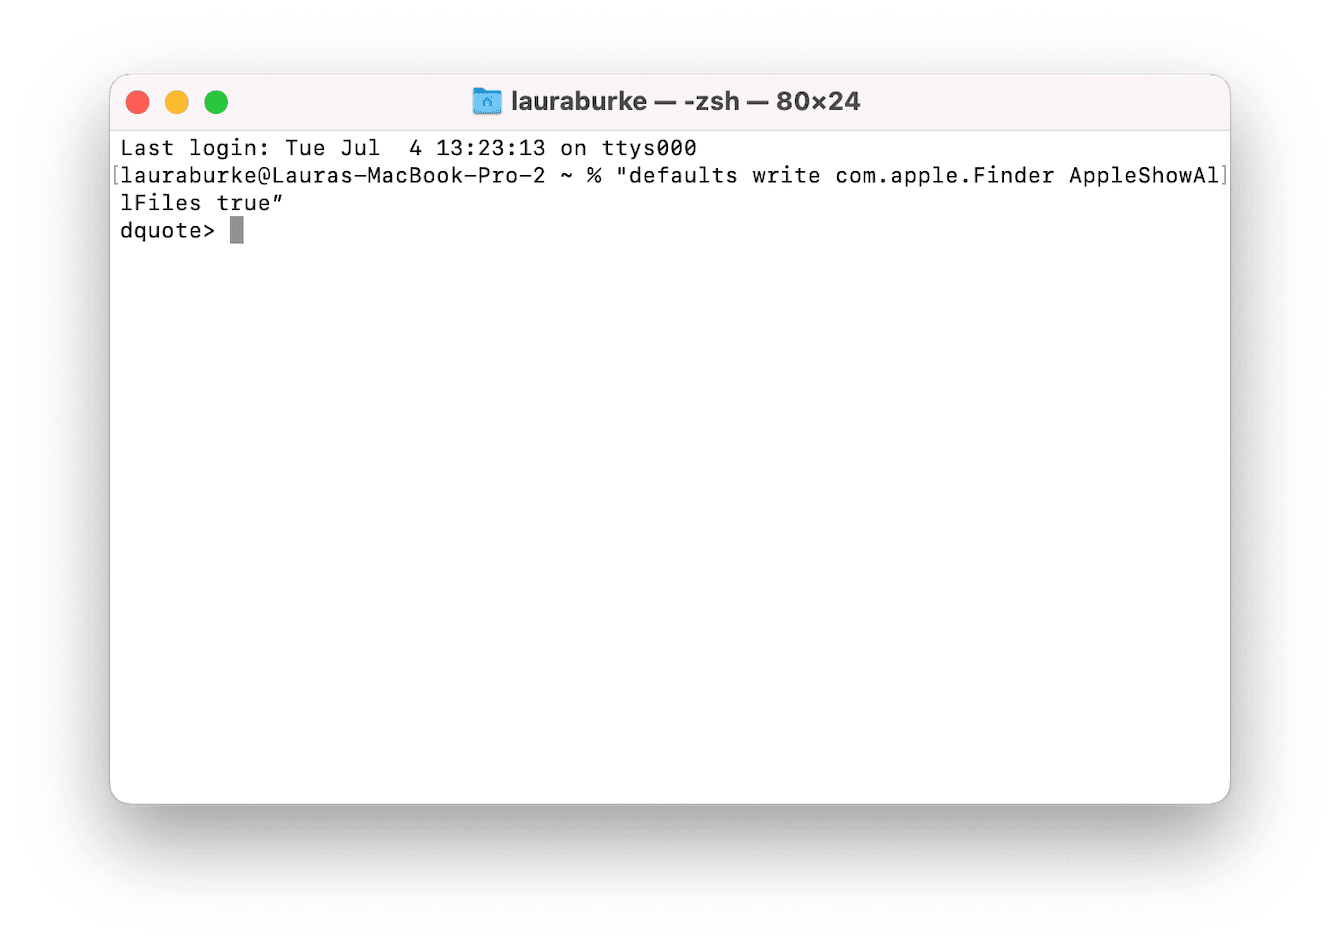 How to view hidden files on Mac in Terminal 